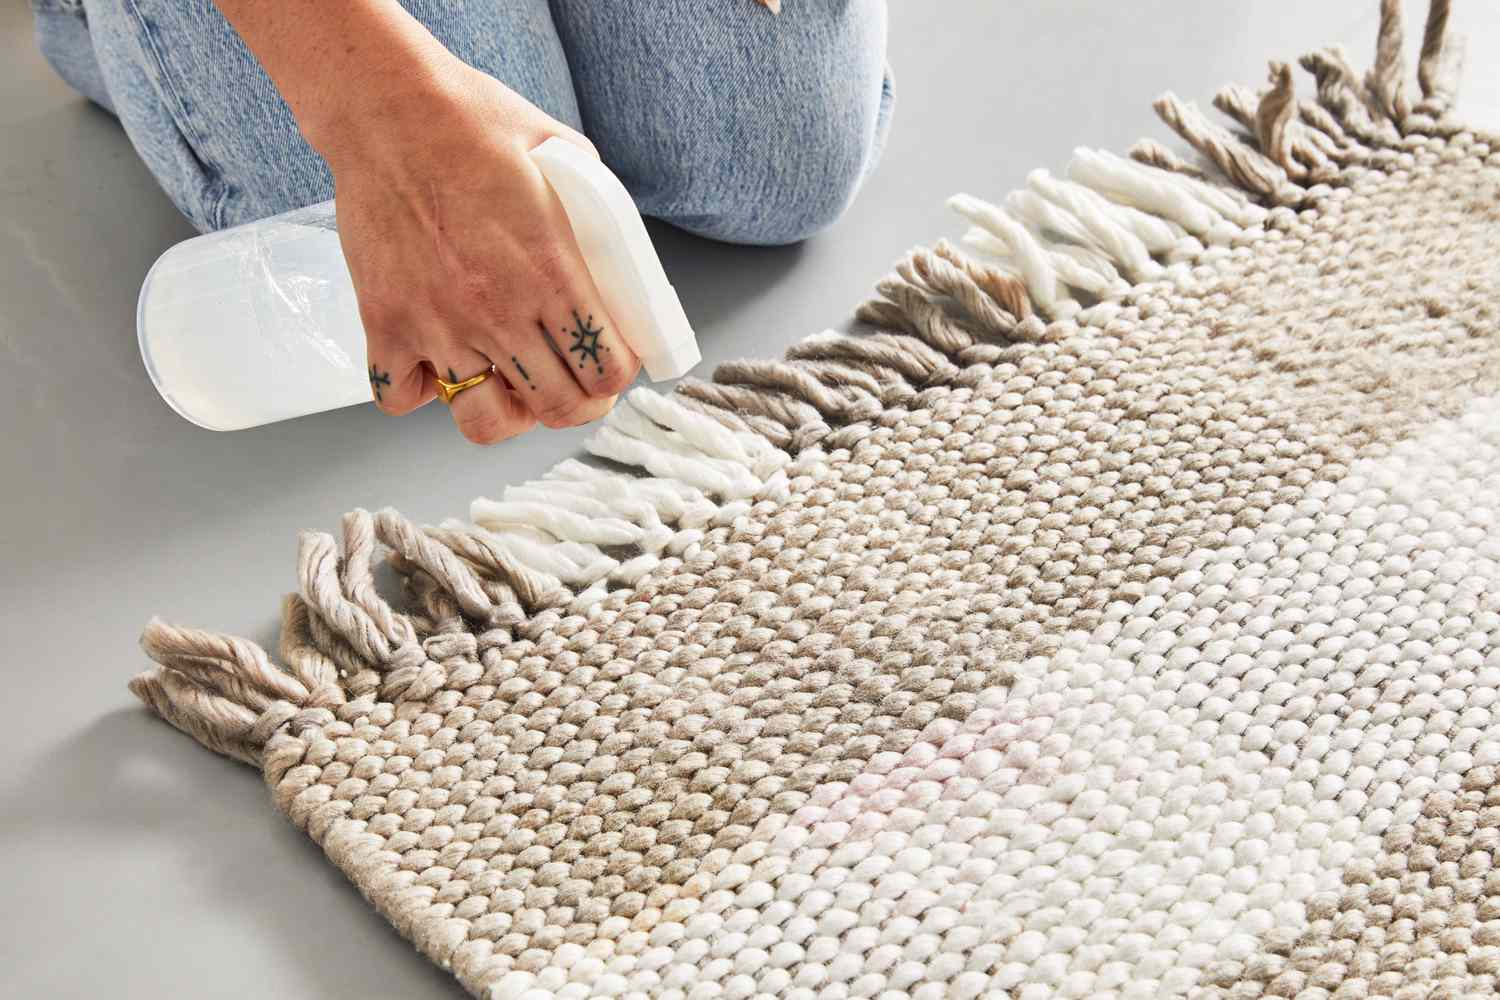 A person spraying a cleaning solution on the Rugs.com Washable Eco Plaid Indoor/Outdoor Rug